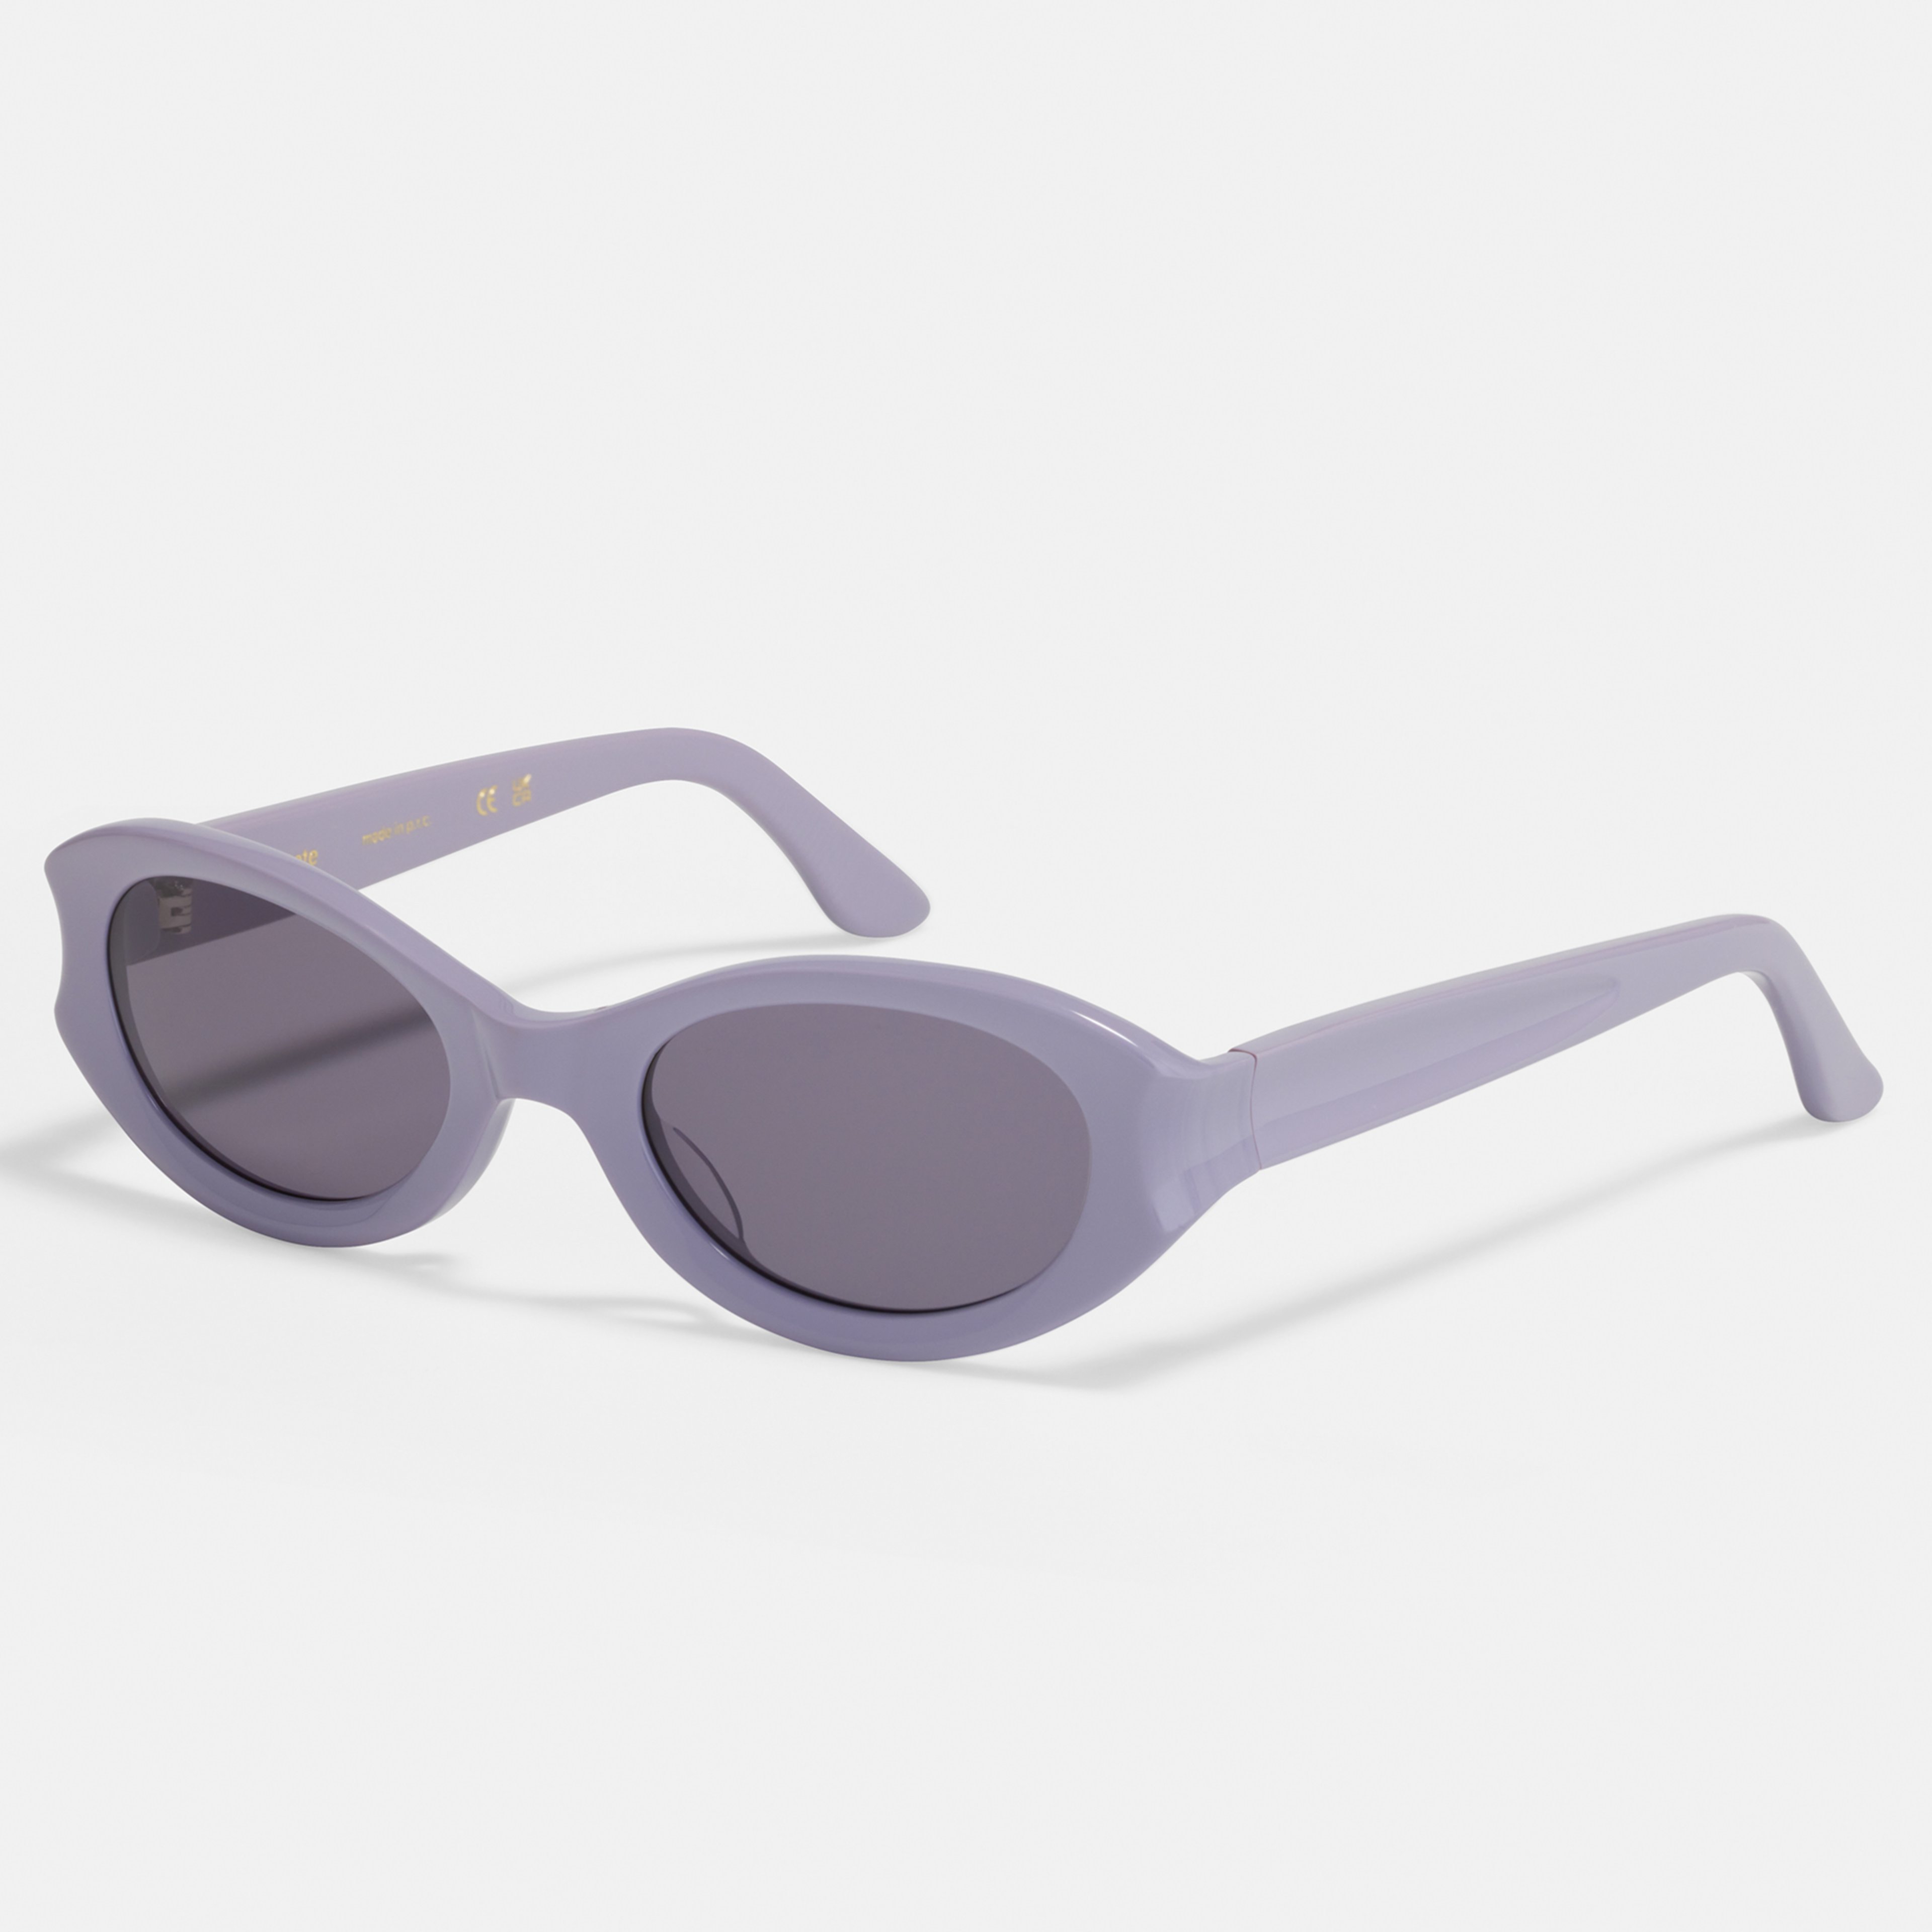 Ace & Tate Solaires | oval Renew bio-acétate in Violet